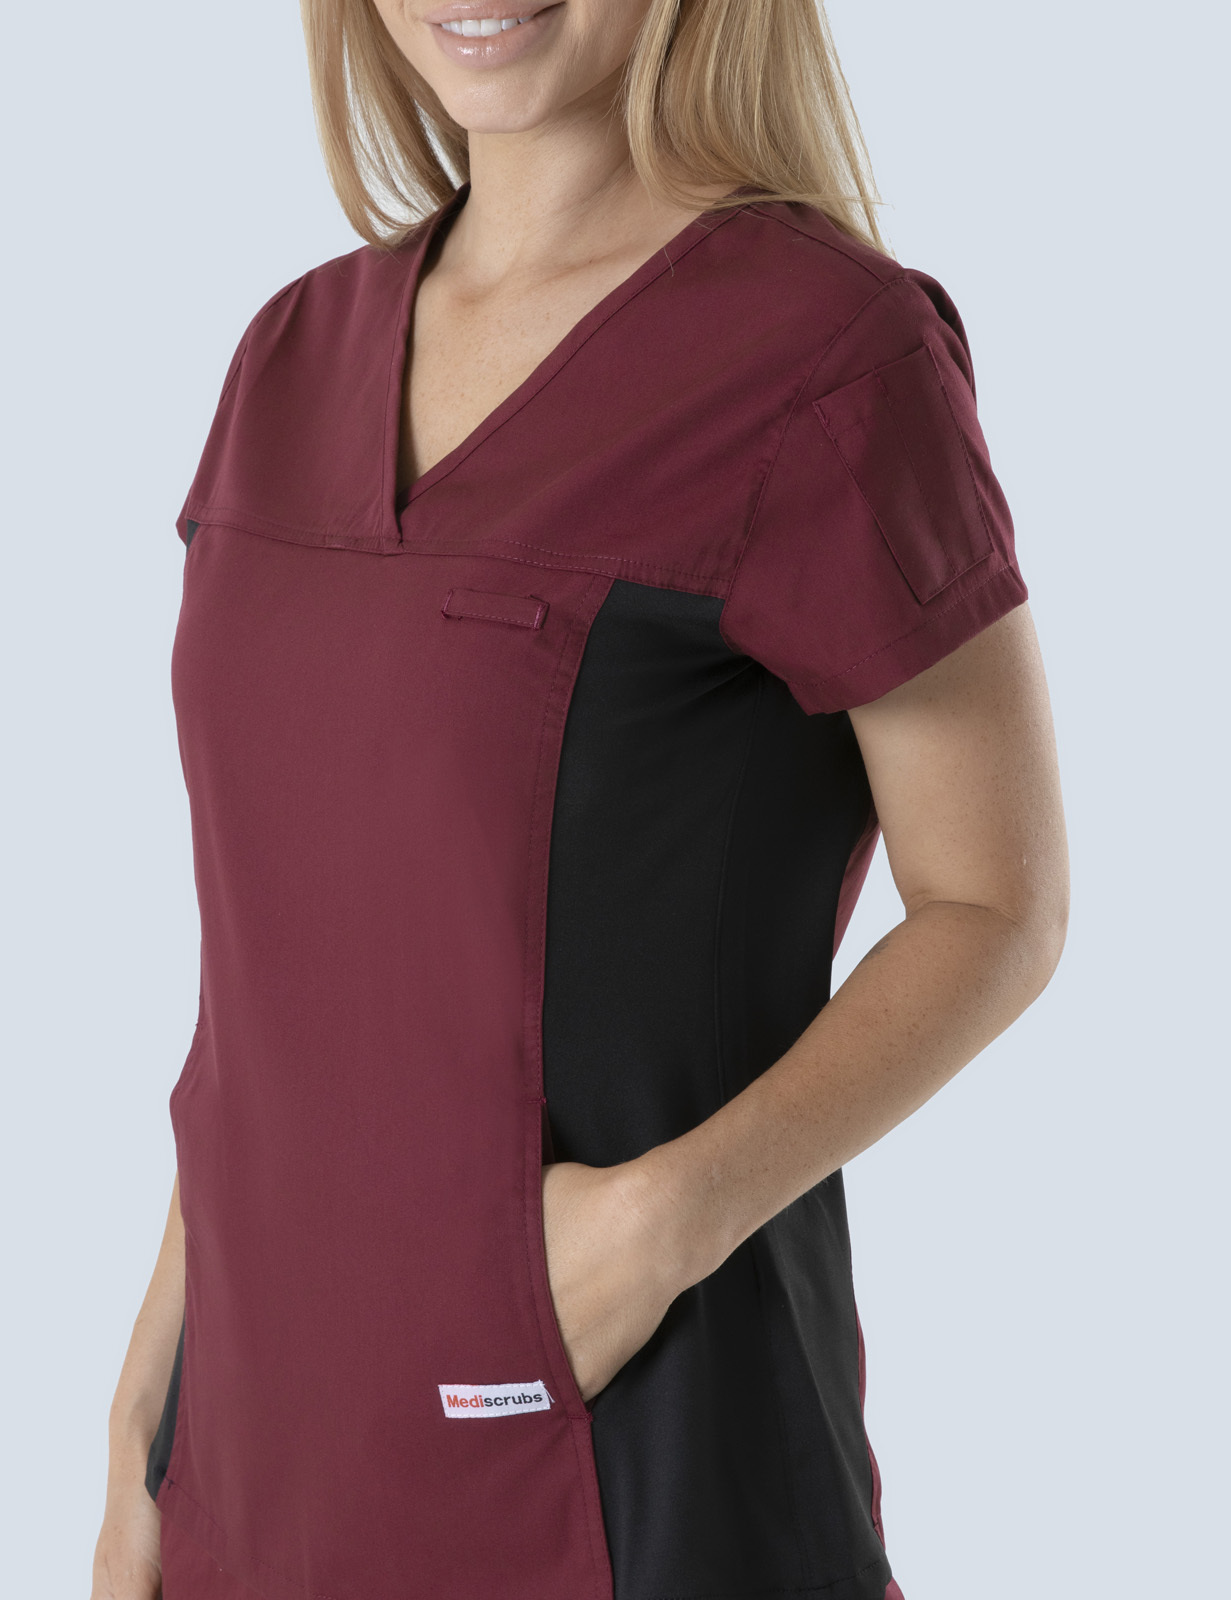 Ashmore Retreat Registered Nurse Top Only Bundle (Women's Fit Spandex in Burgundy incl Logo) 